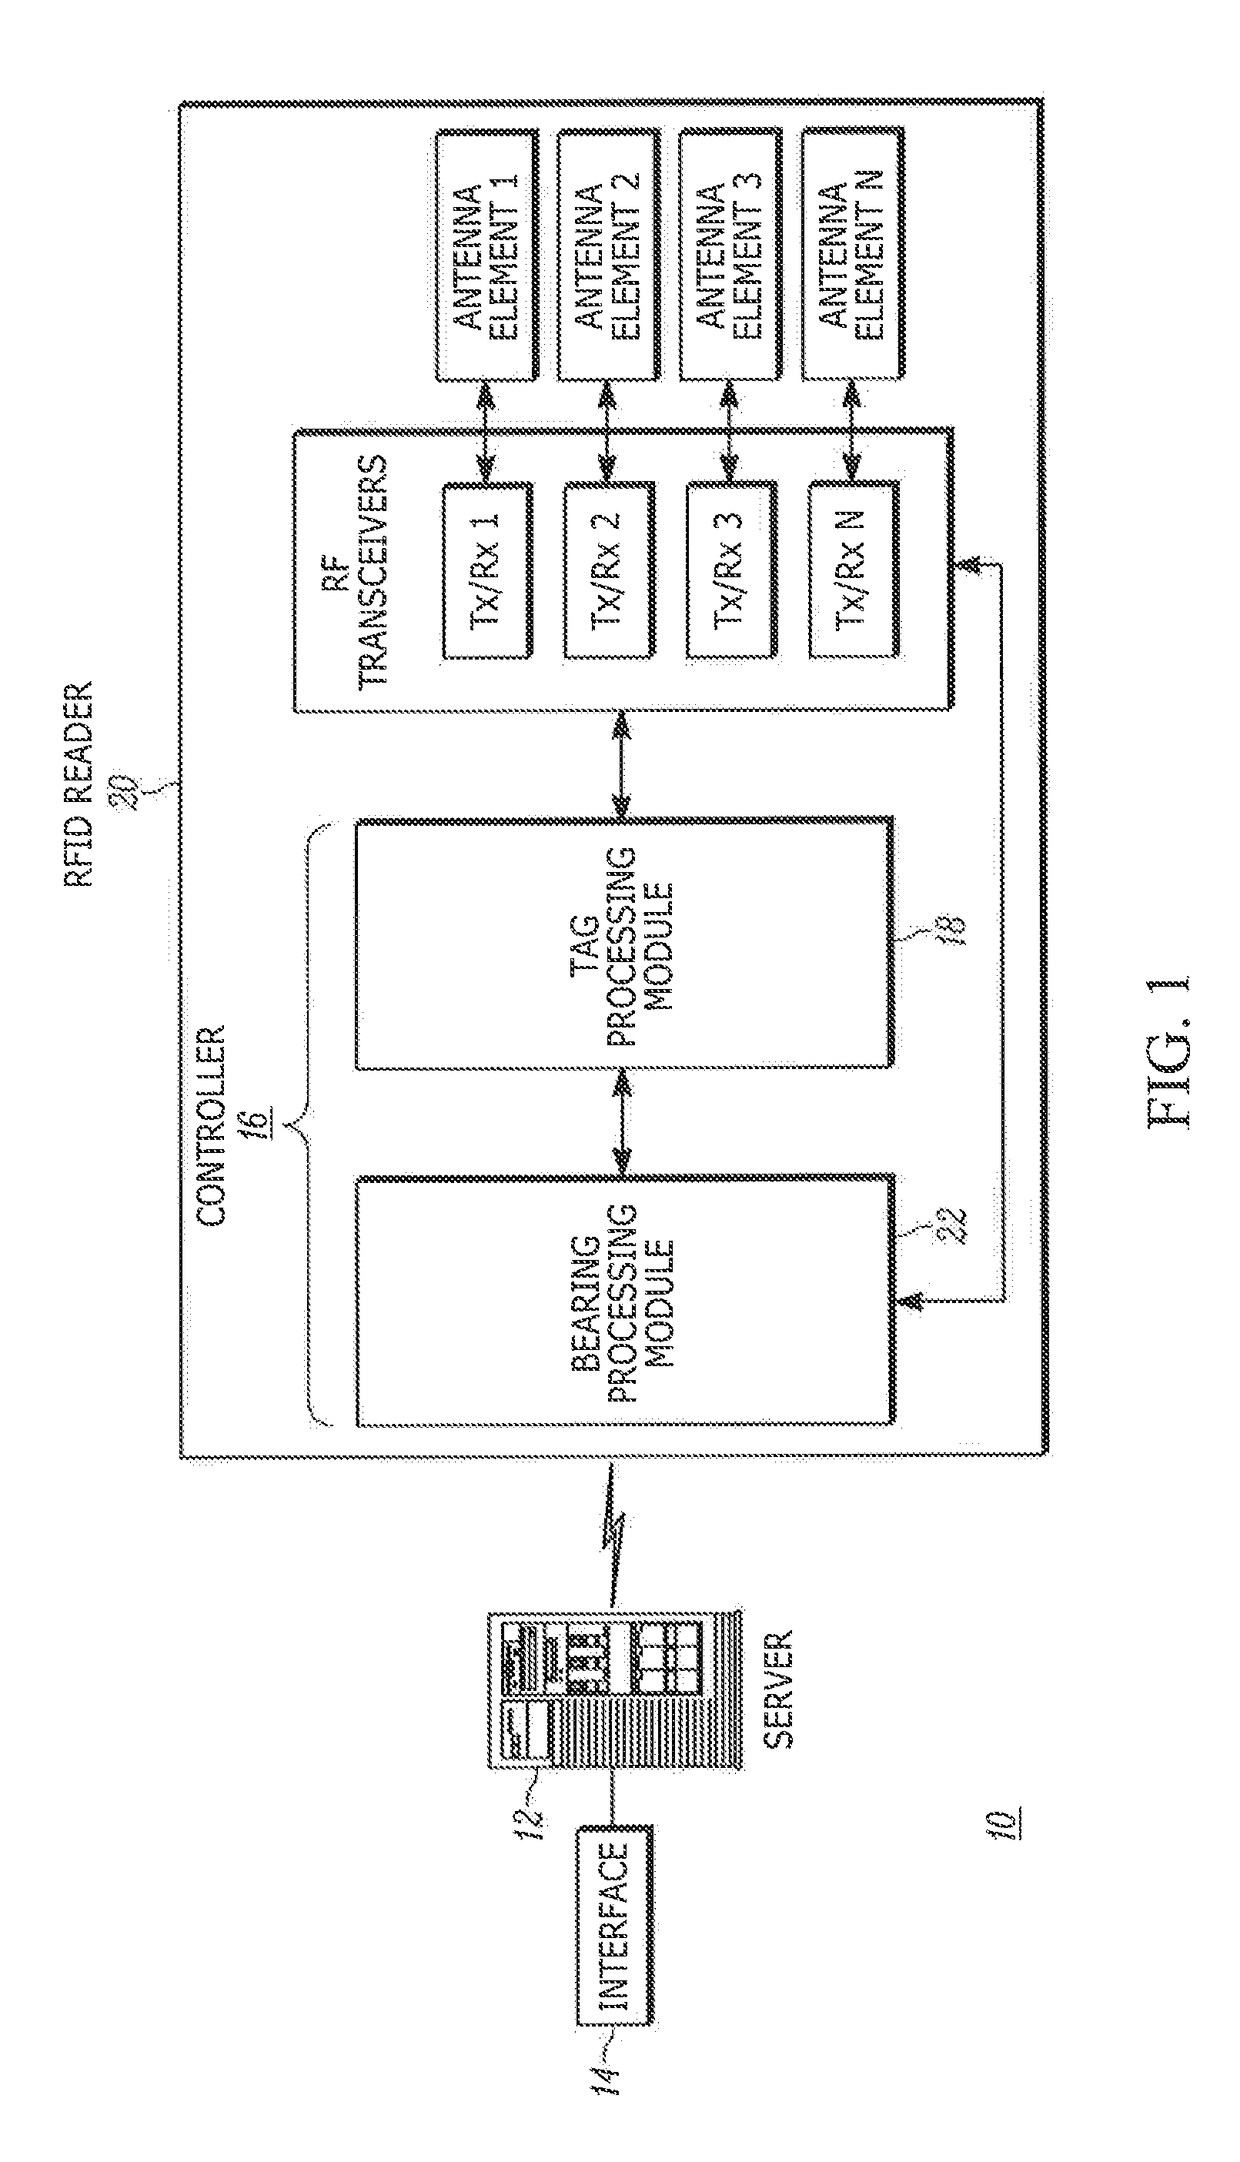 System for, and method of, accurately and rapidly determining, in real-time, true bearings of radio frequency identification (RFID) tags associated with items in a controlled area